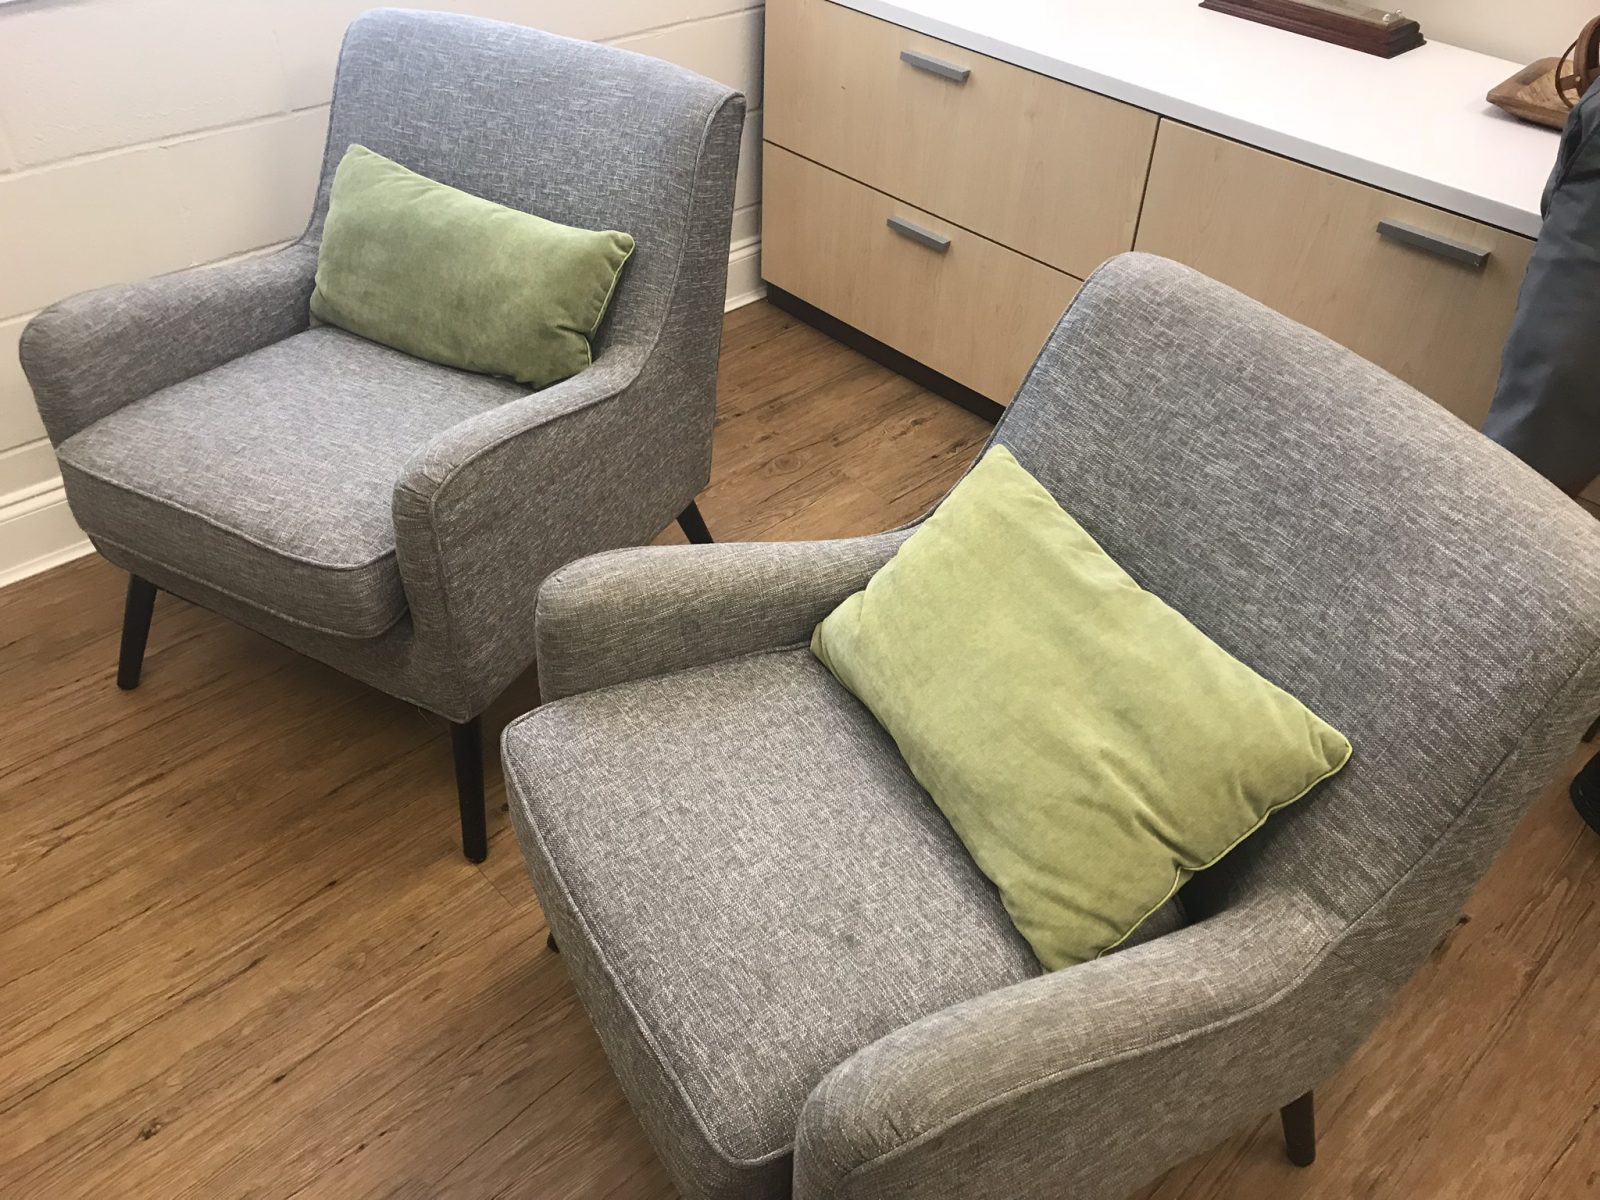 Professional Upholstery Cleaning Dunedin Florida by Howards Cleaning Service